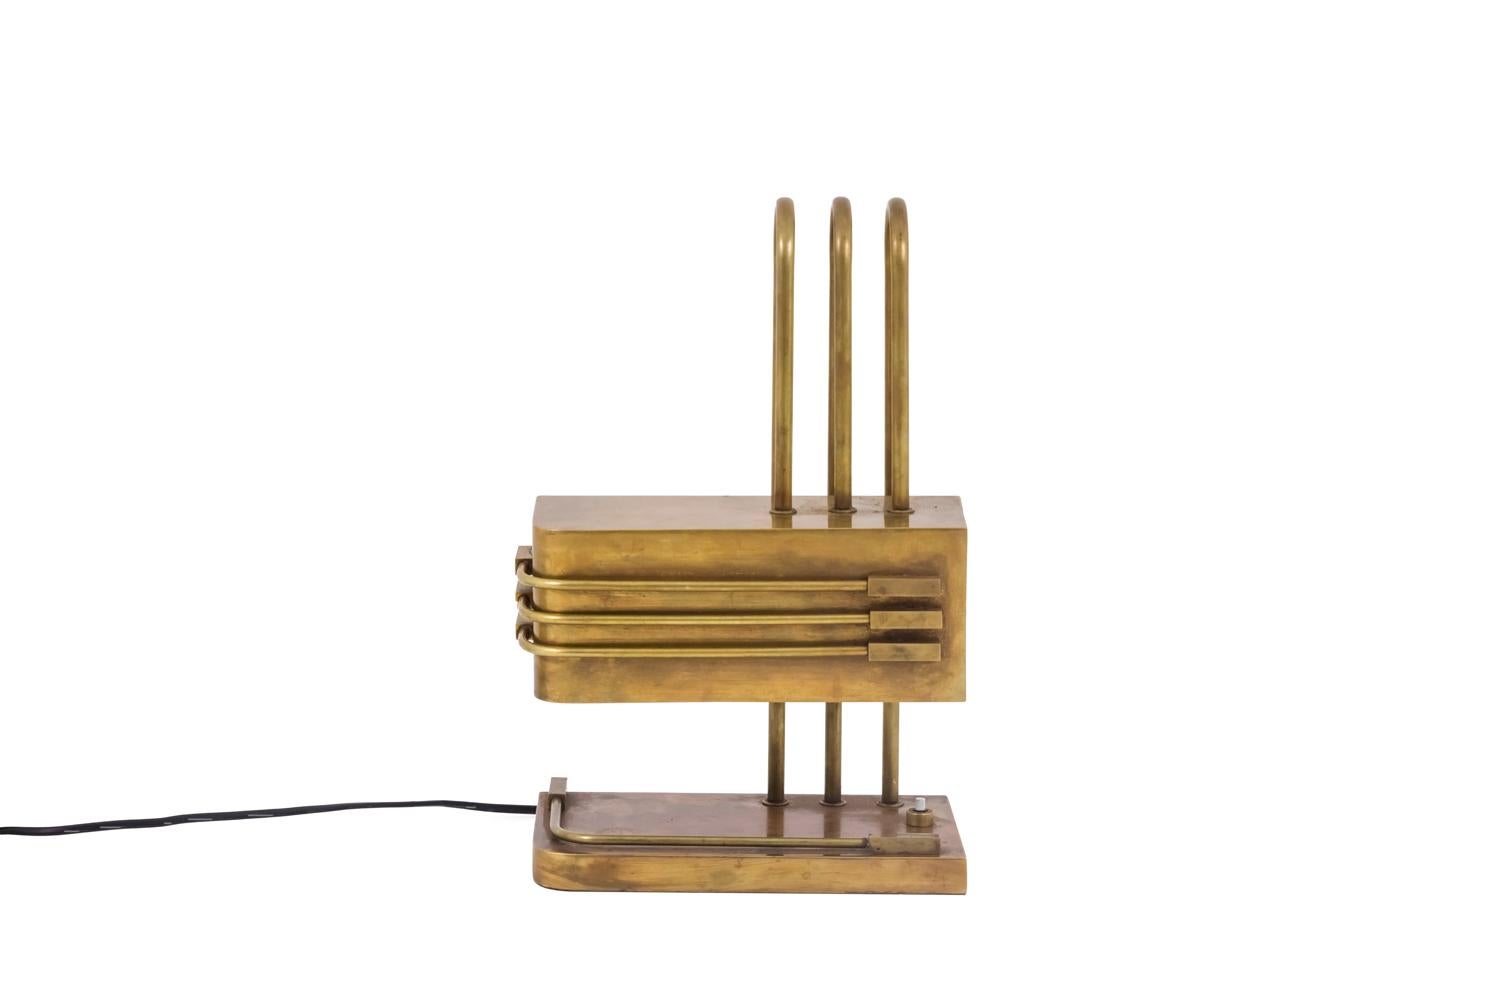 Bauhaus lamp in patinated gilt brass standing on a rectangular base with a curved angle, decorated with an applied form following the curved angle.
Shaft composed of three gilt bronze sticks slightly spaced forming an arch.
Rectangular lampshade